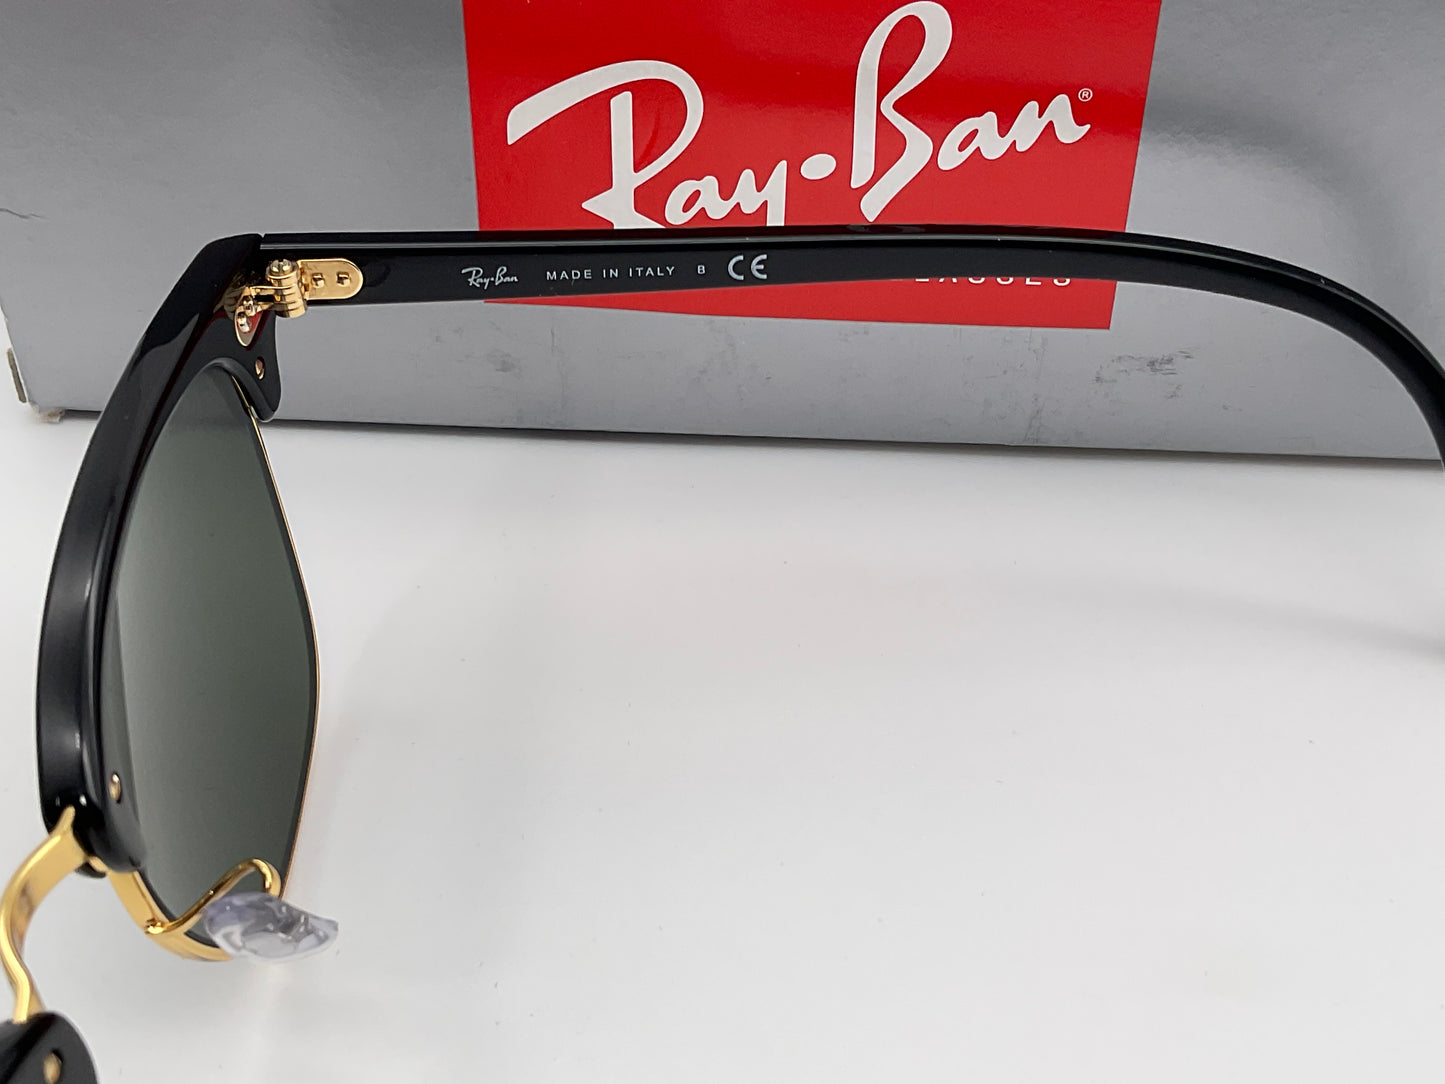 Ray-Ban RB3016 Clubmaster Classic Sunglasses Black/ Green Classic 49mm